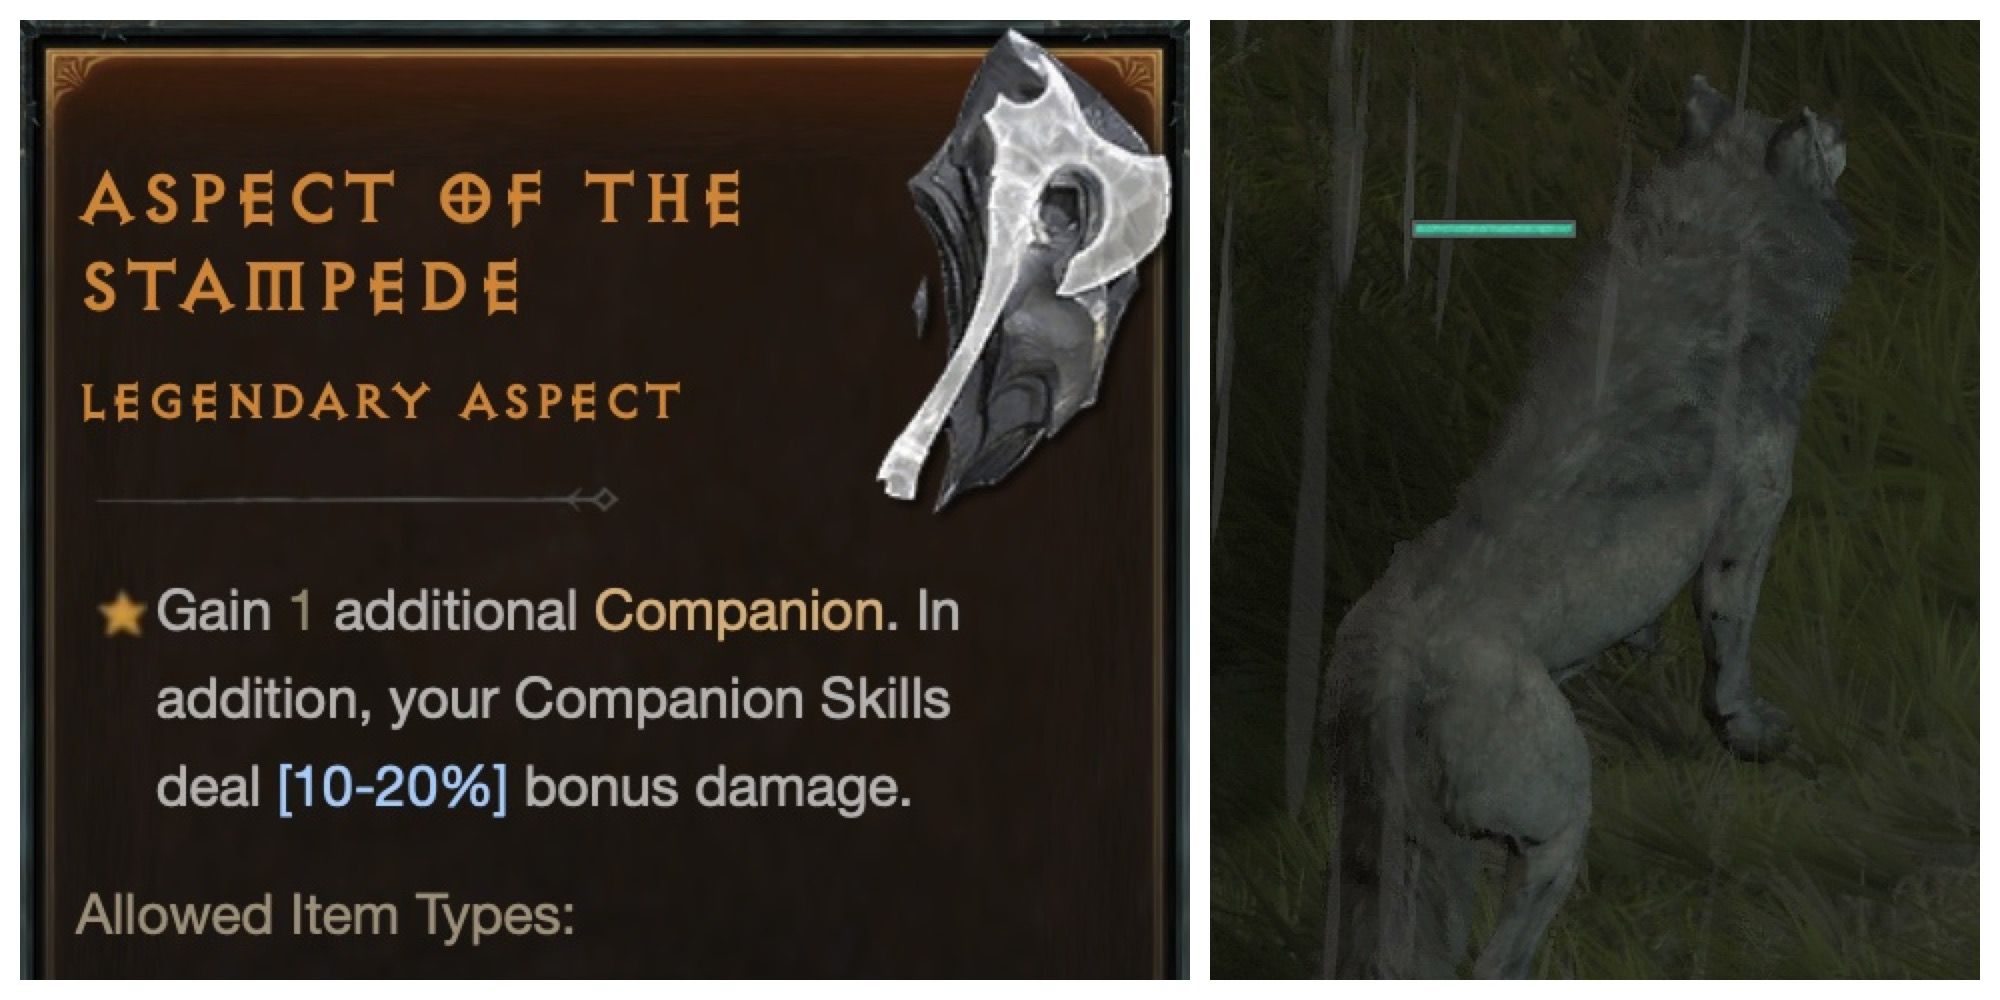 D4 Aspect of the Stampede description and effect, next to a Druid's wolf companion